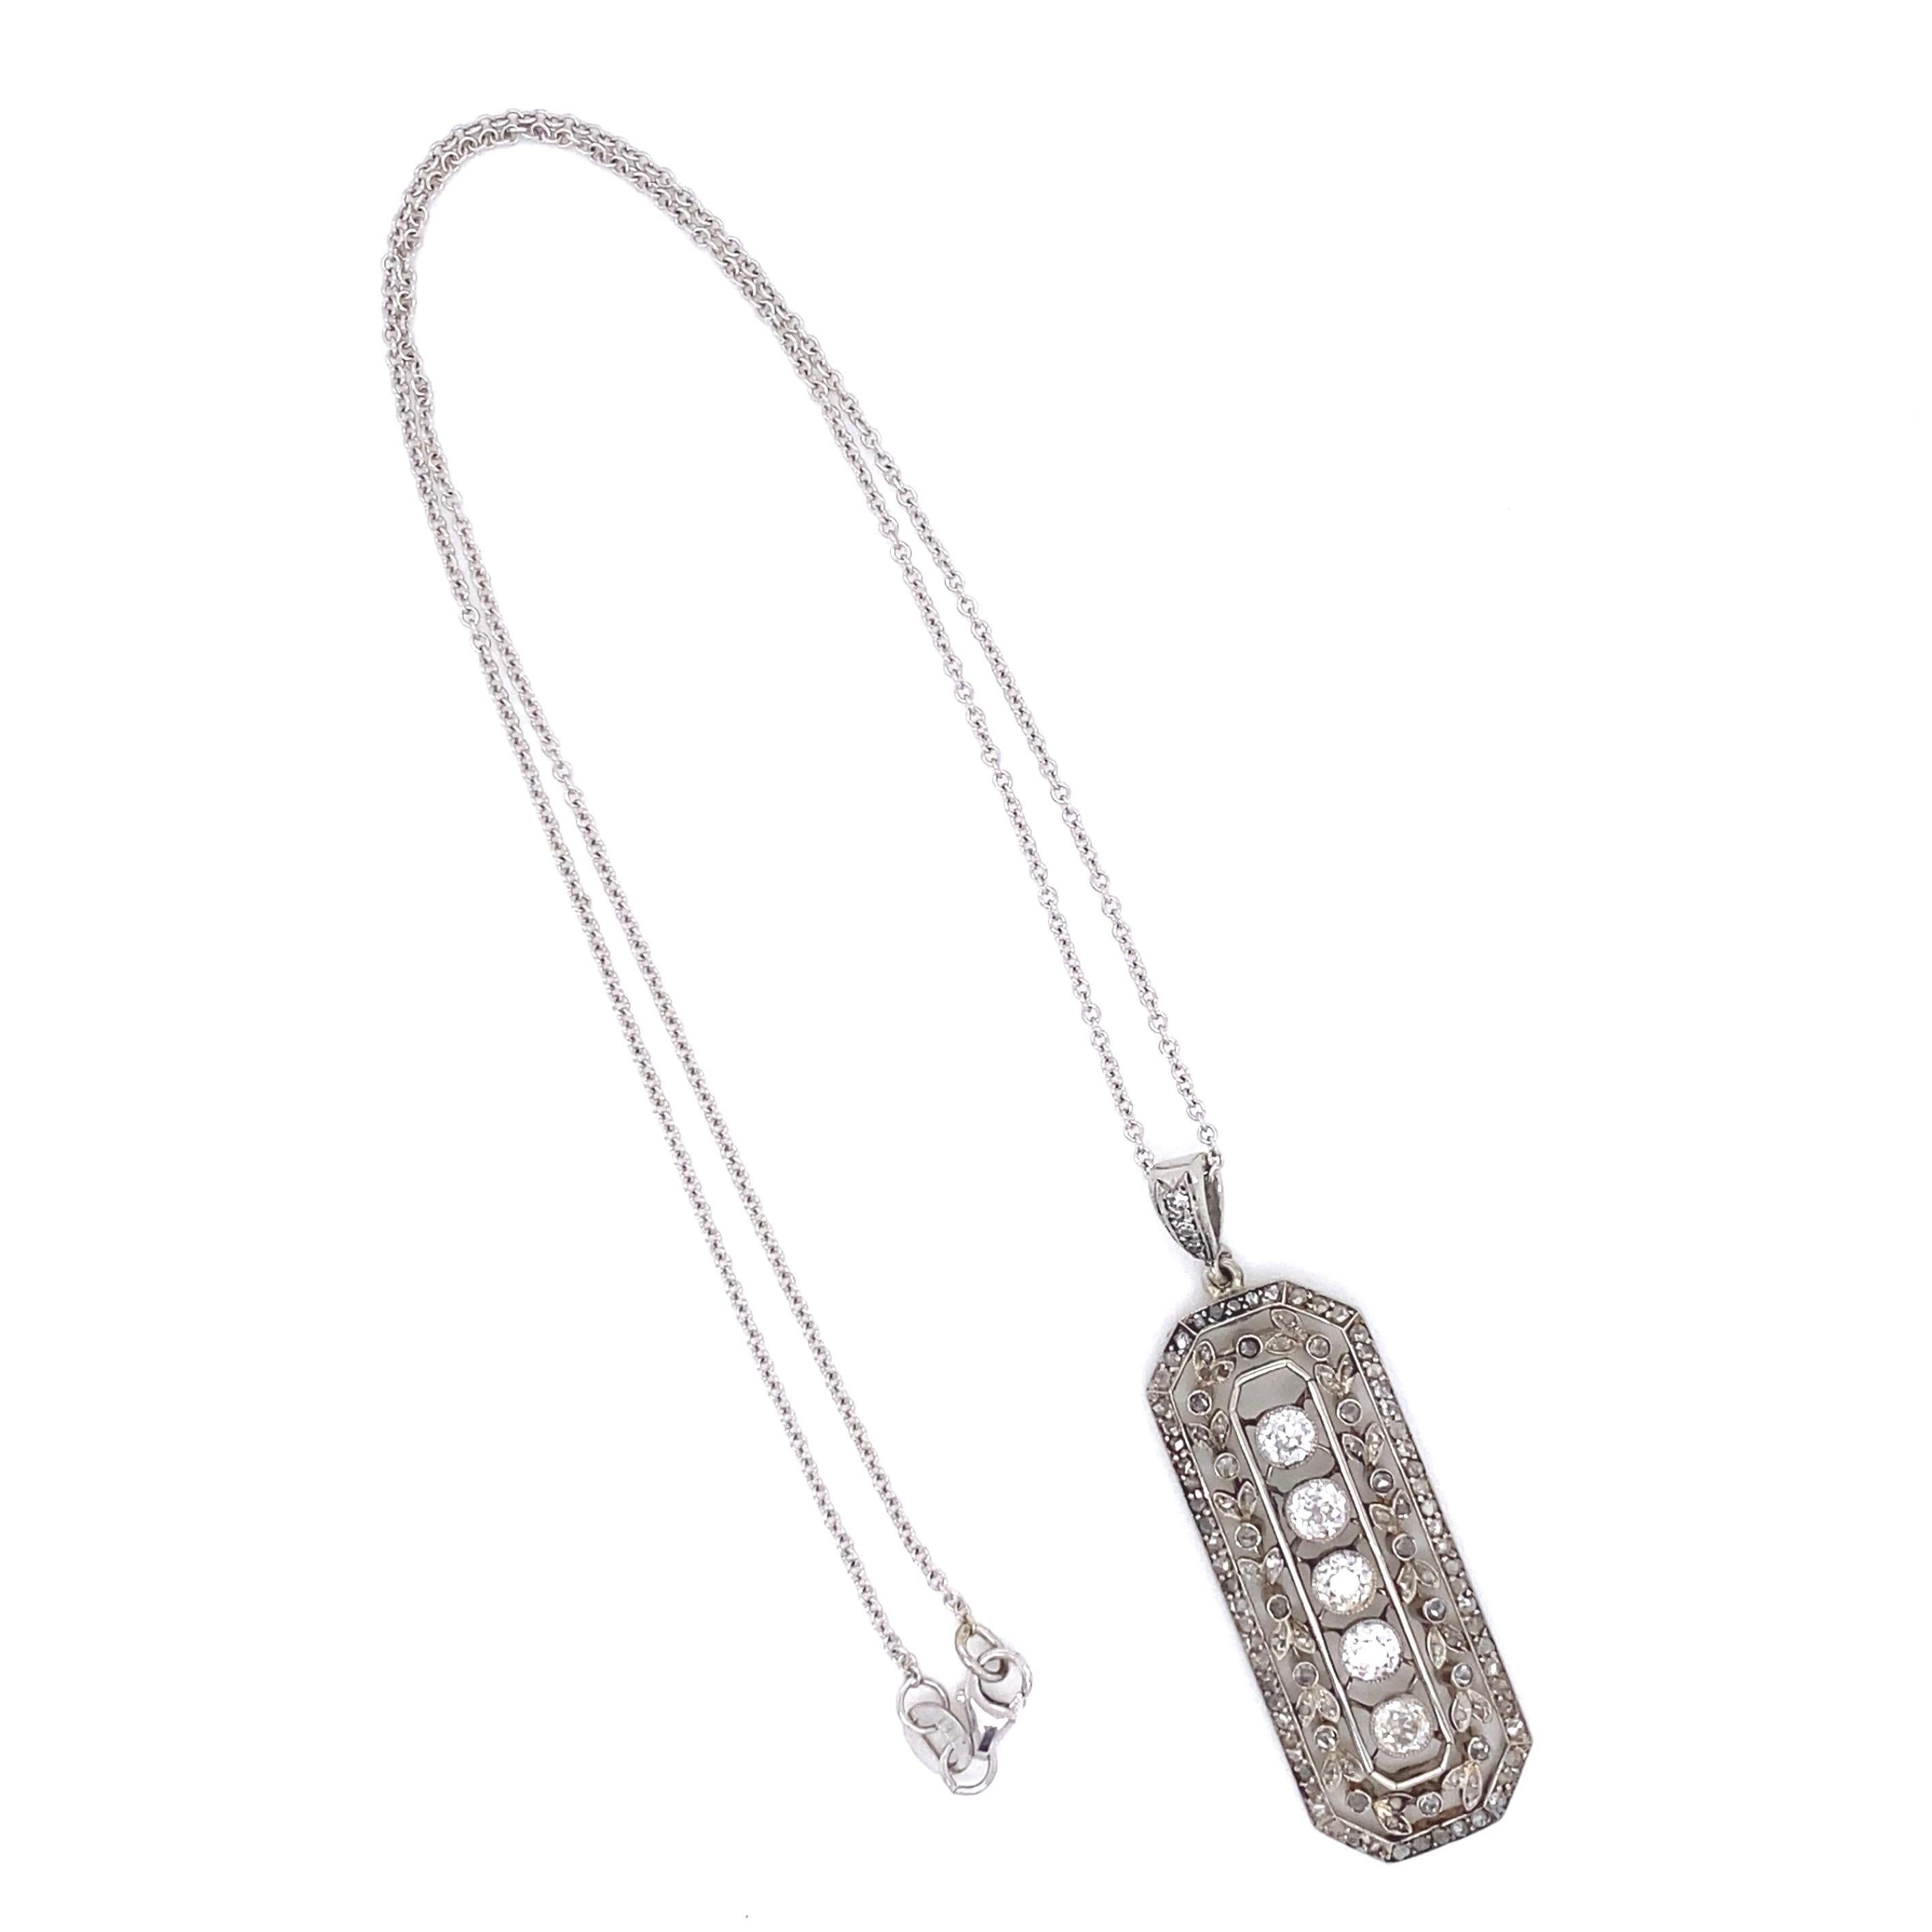 Simply Beautiful! Elegant and finely detailed Edwardian Diamond Pendant Necklace. Hand set with Diamonds, weighing approx. 2.00tcw. Pendant measures approx. 1.82” L x 0.58i” W x 0.17” H. Suspended from a 14K White Gold Chain, approx. 16” long.